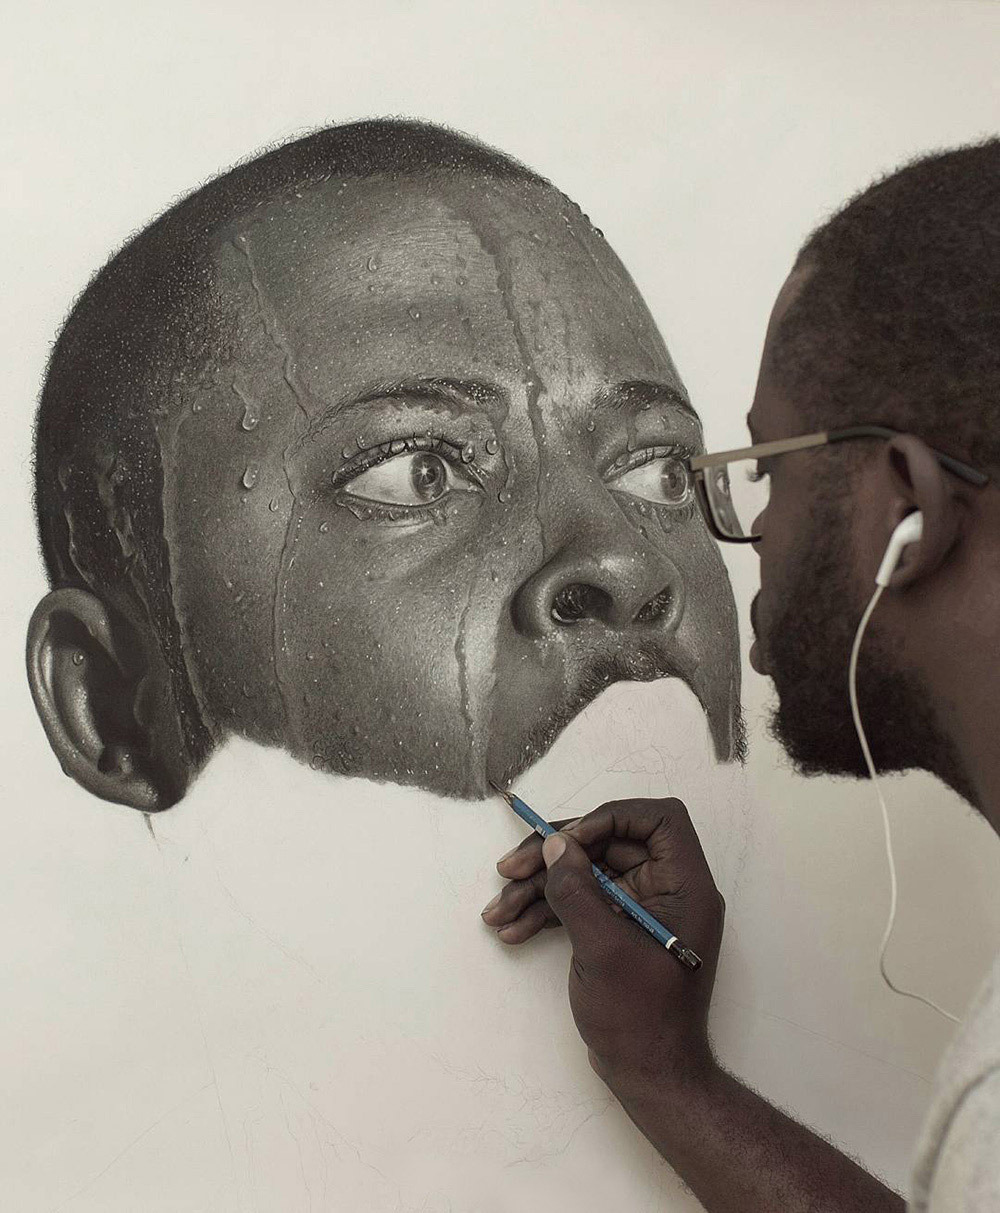 lookibuzz.blogg.se - Hyper realistic drawings